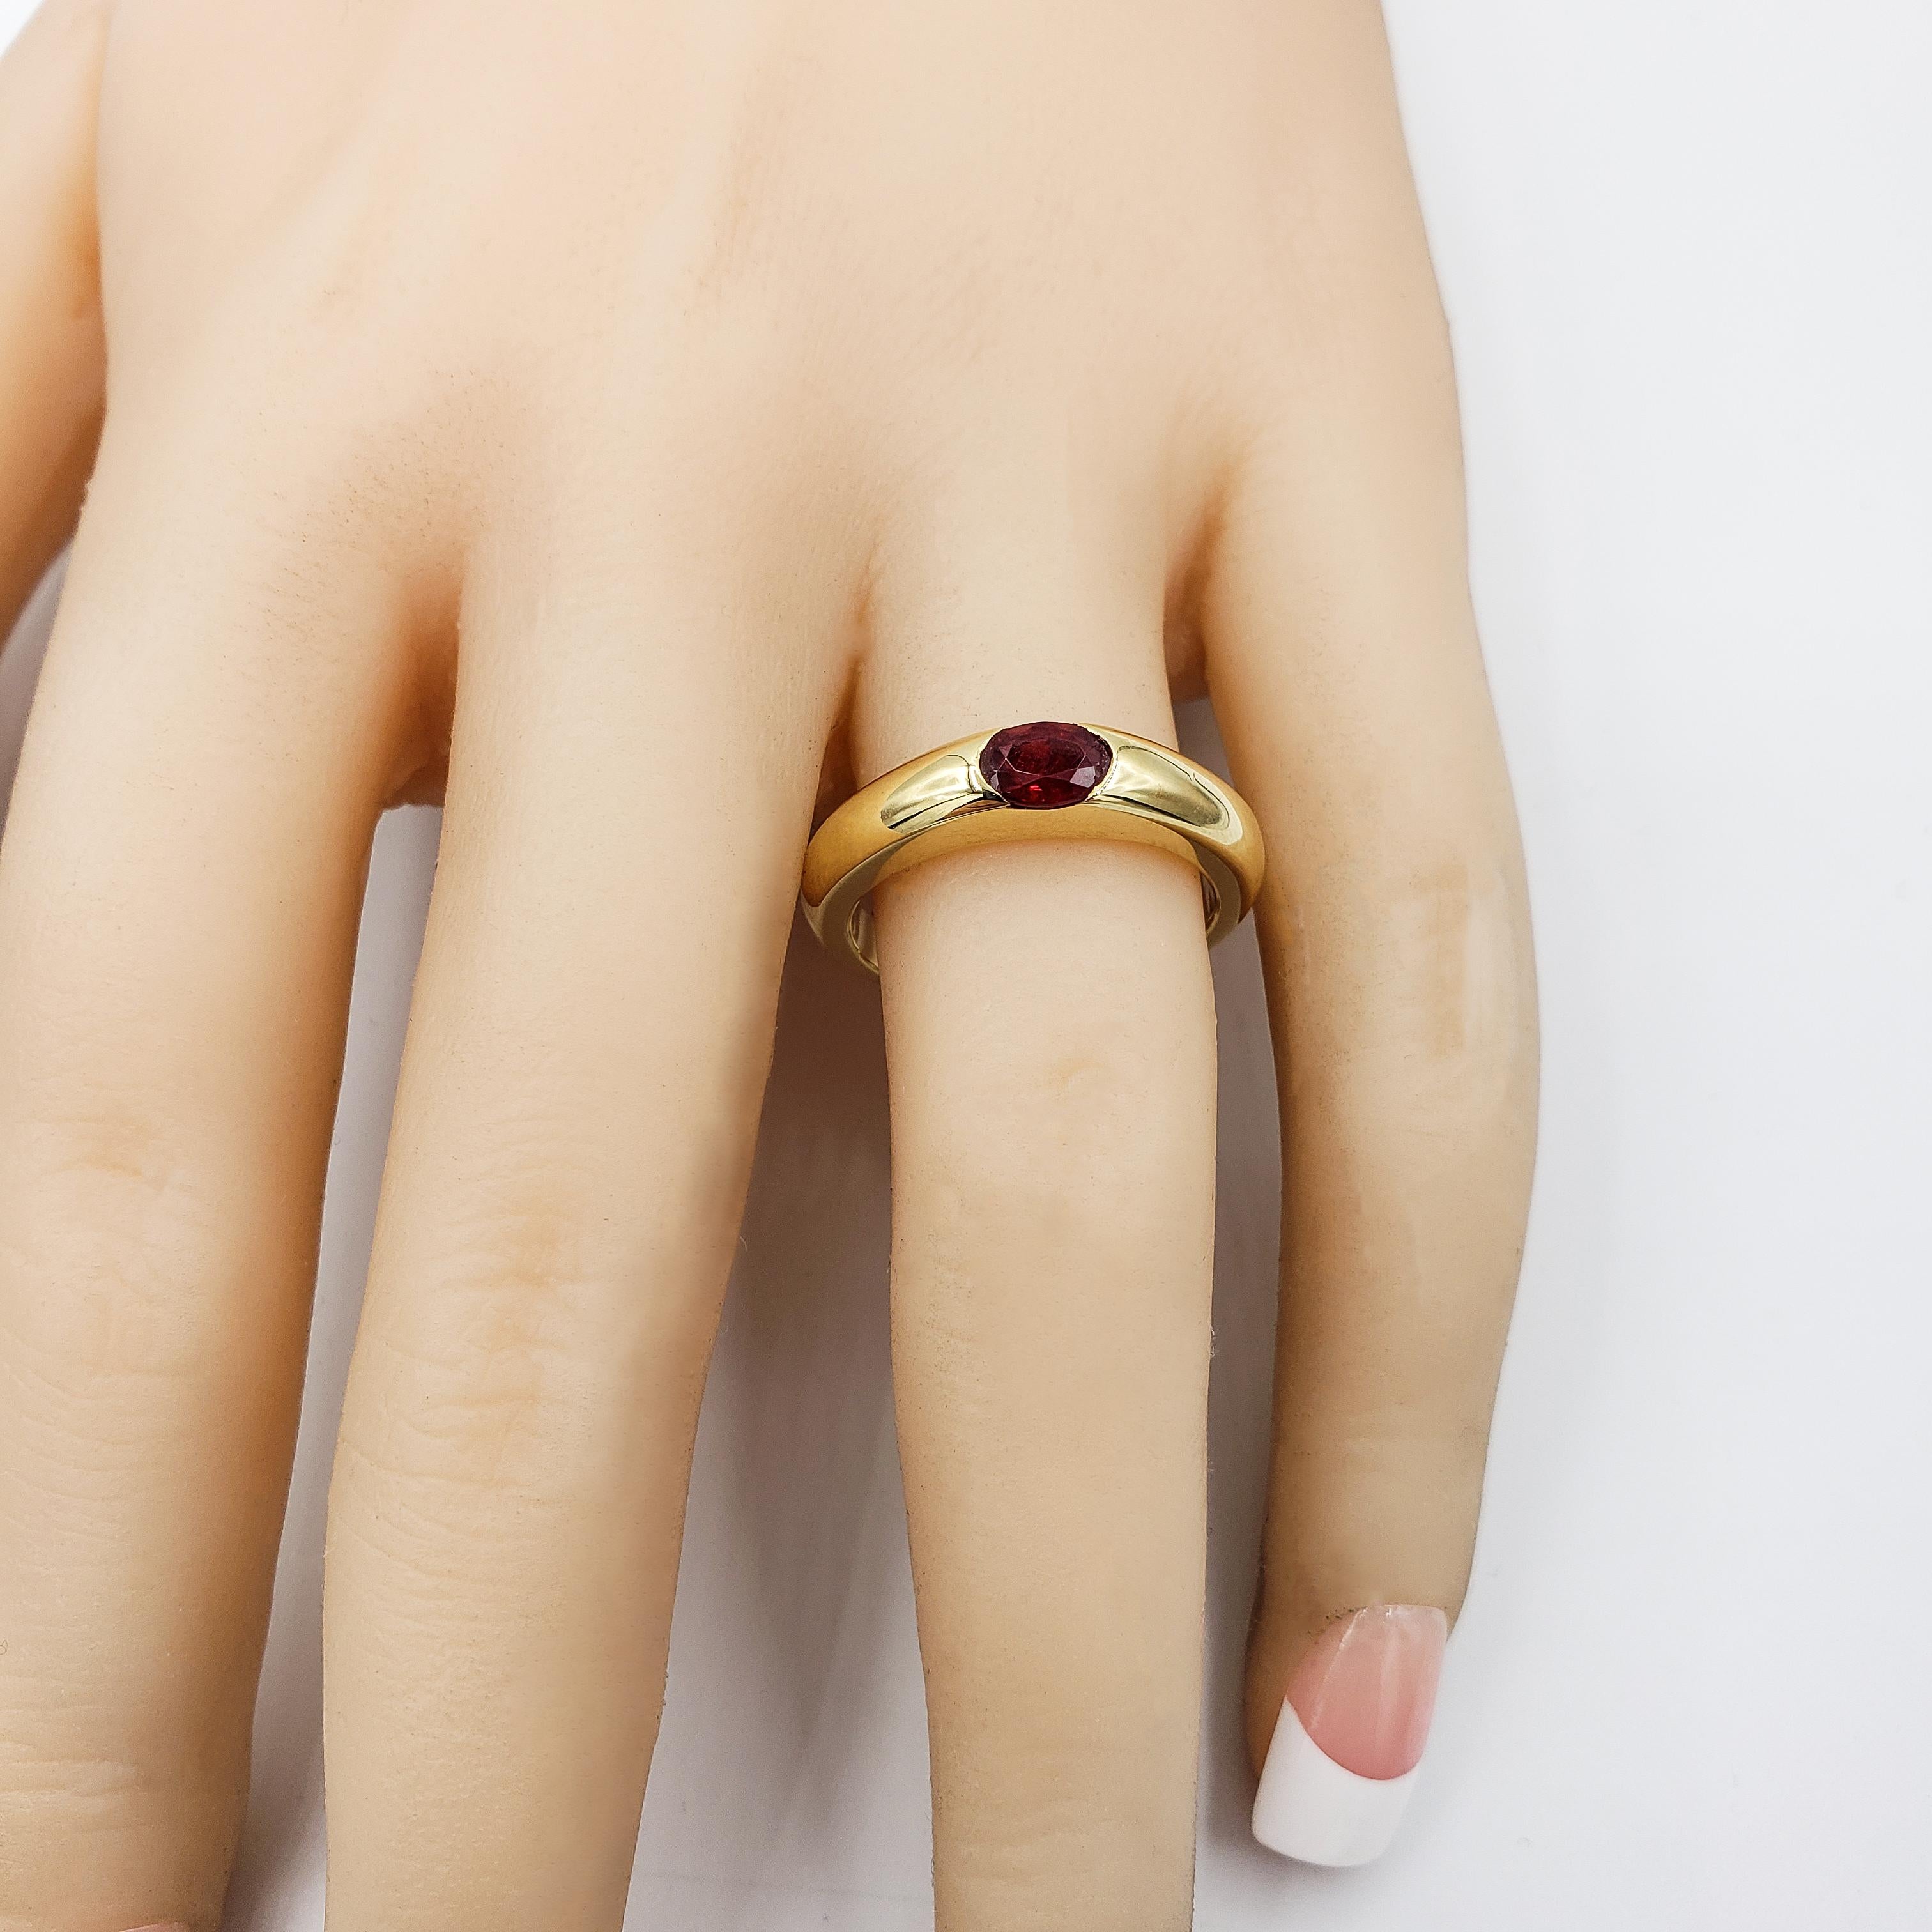 0.45 Carats Total Oval Cut Ruby Solitaire Wedding Band in Yellow Gold For Sale 3